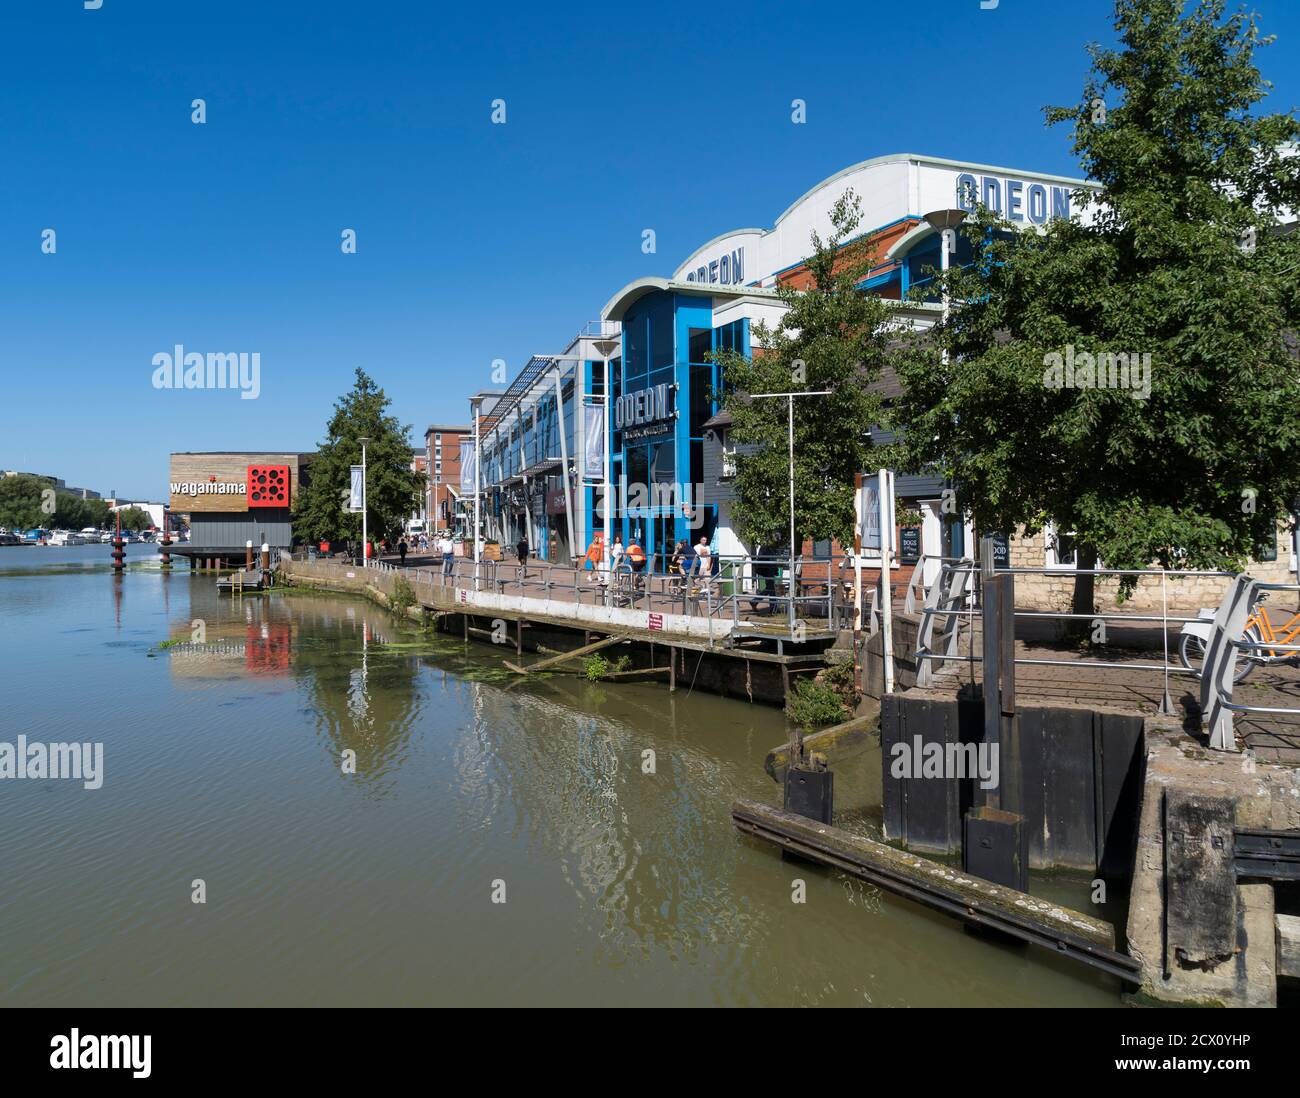 Revitalised area of the Brayford Pool Brayford Wharf North Lincoln city August 2020 Stock Photo